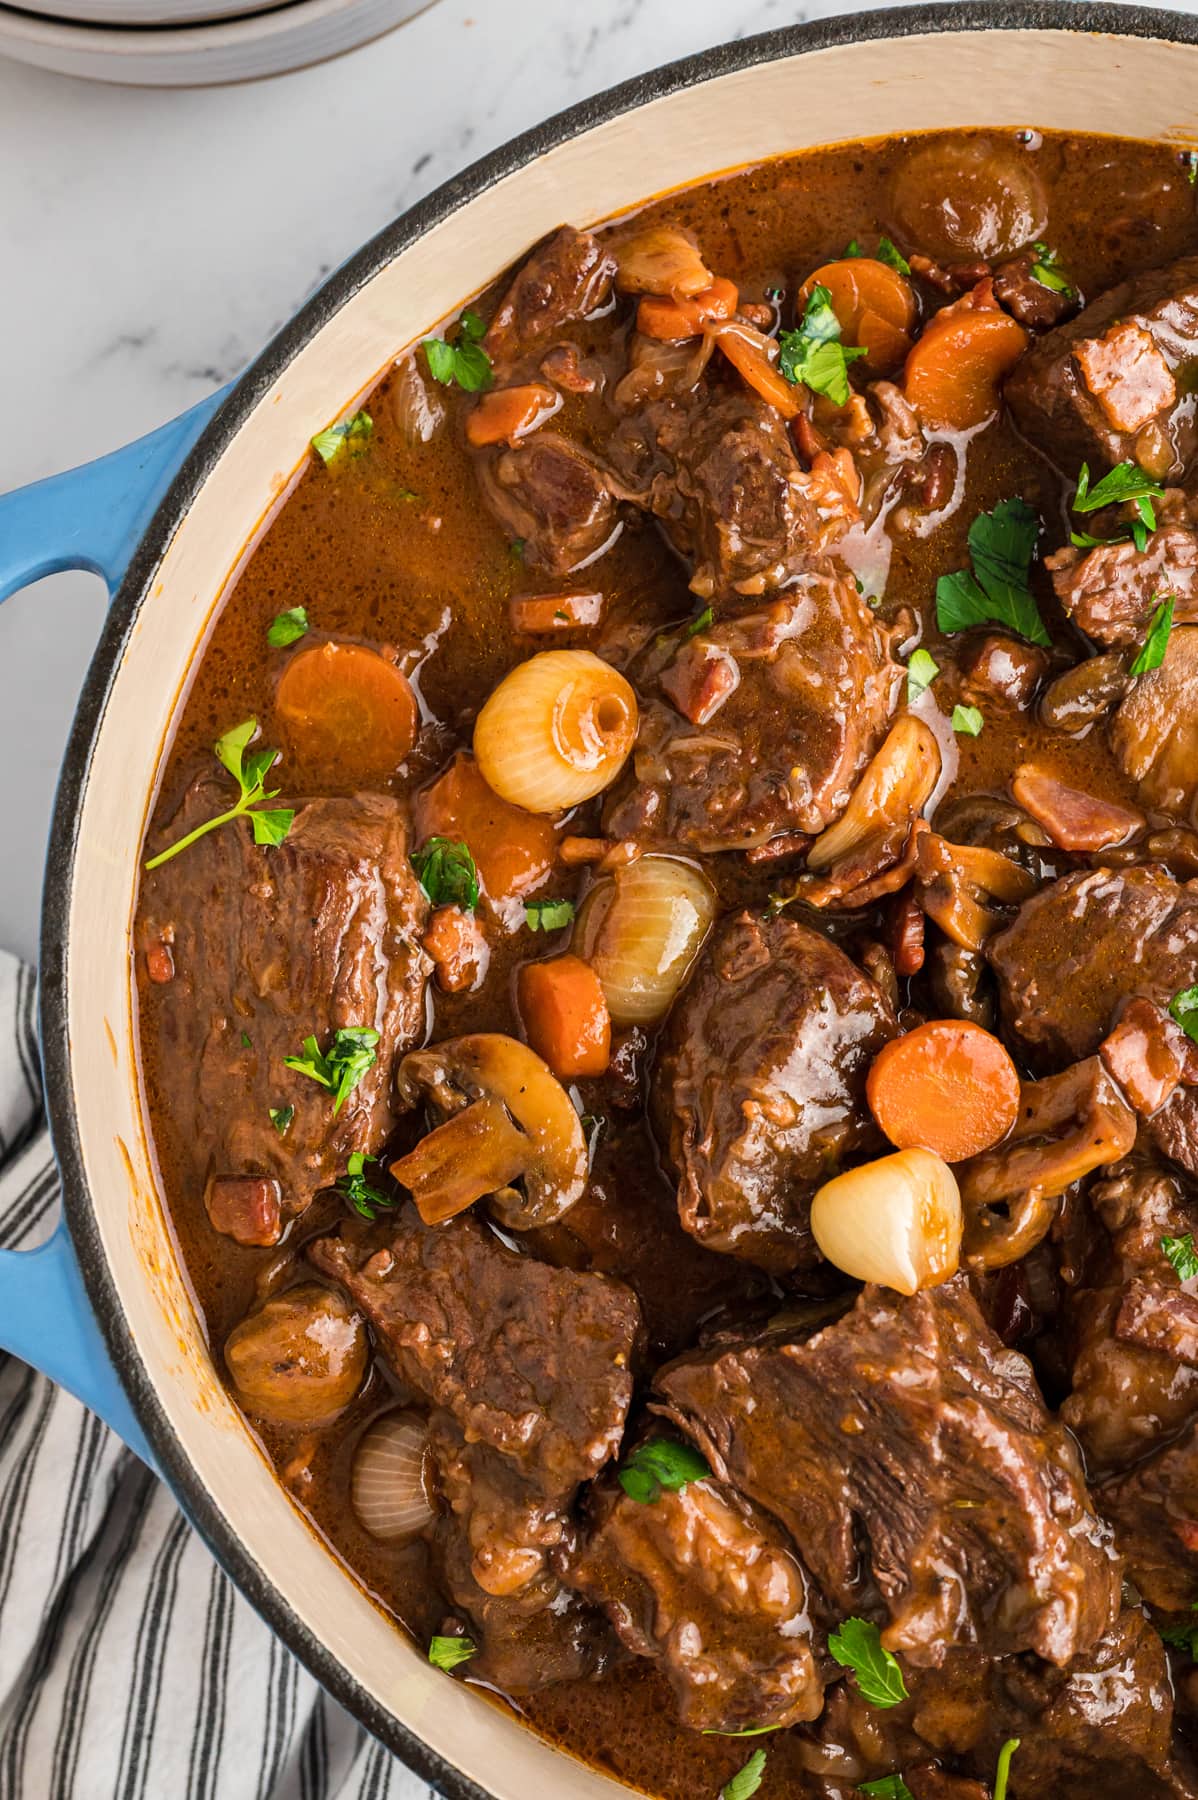 Overhead view of a pot of Beef Bourguignon